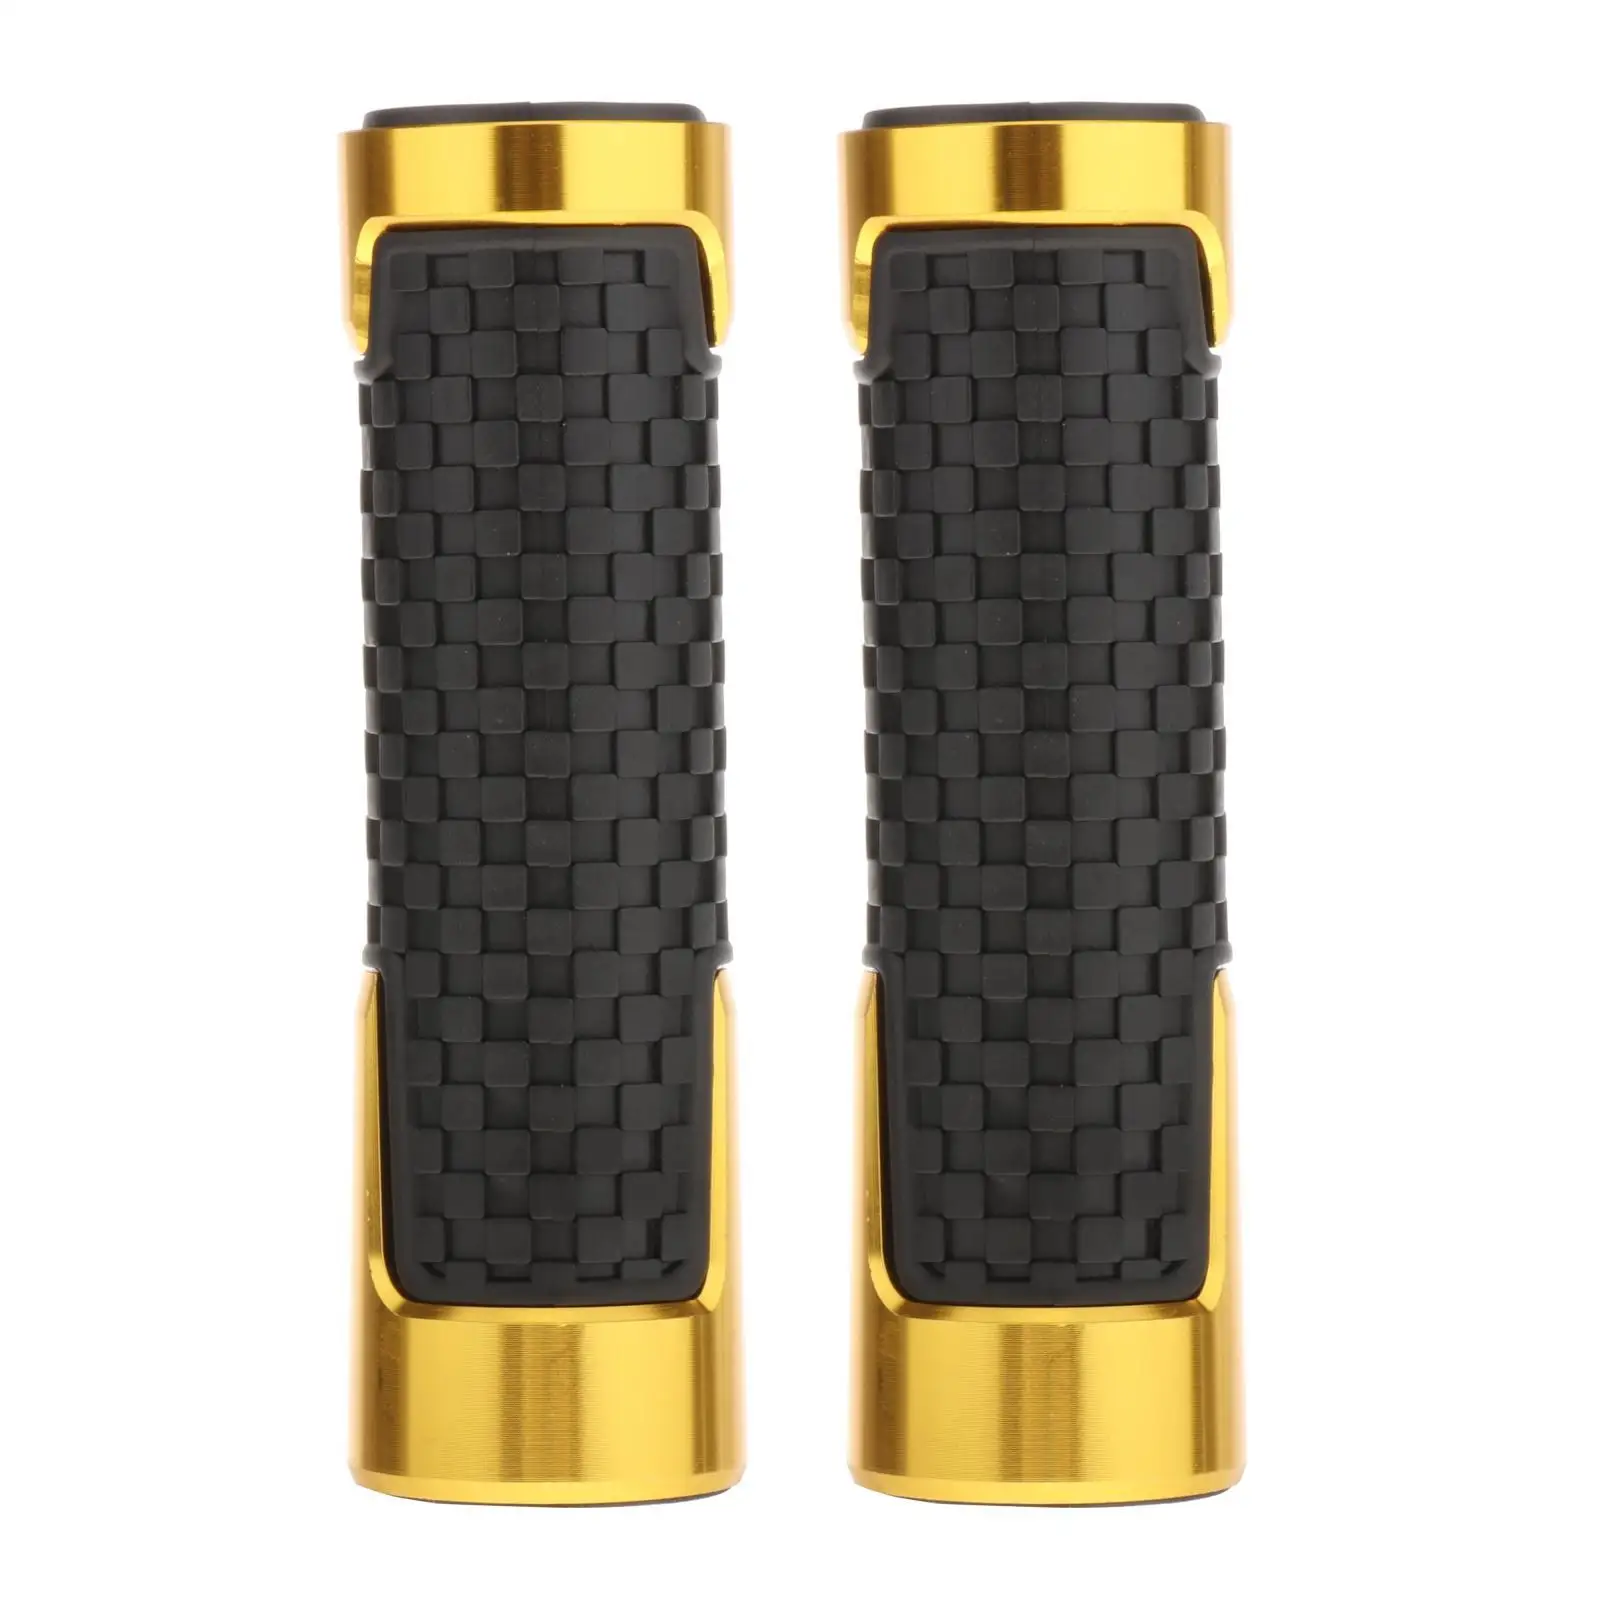 1Pair Motorcycle Handlebar Grips Replacements Easy and Convenient to Install and Use